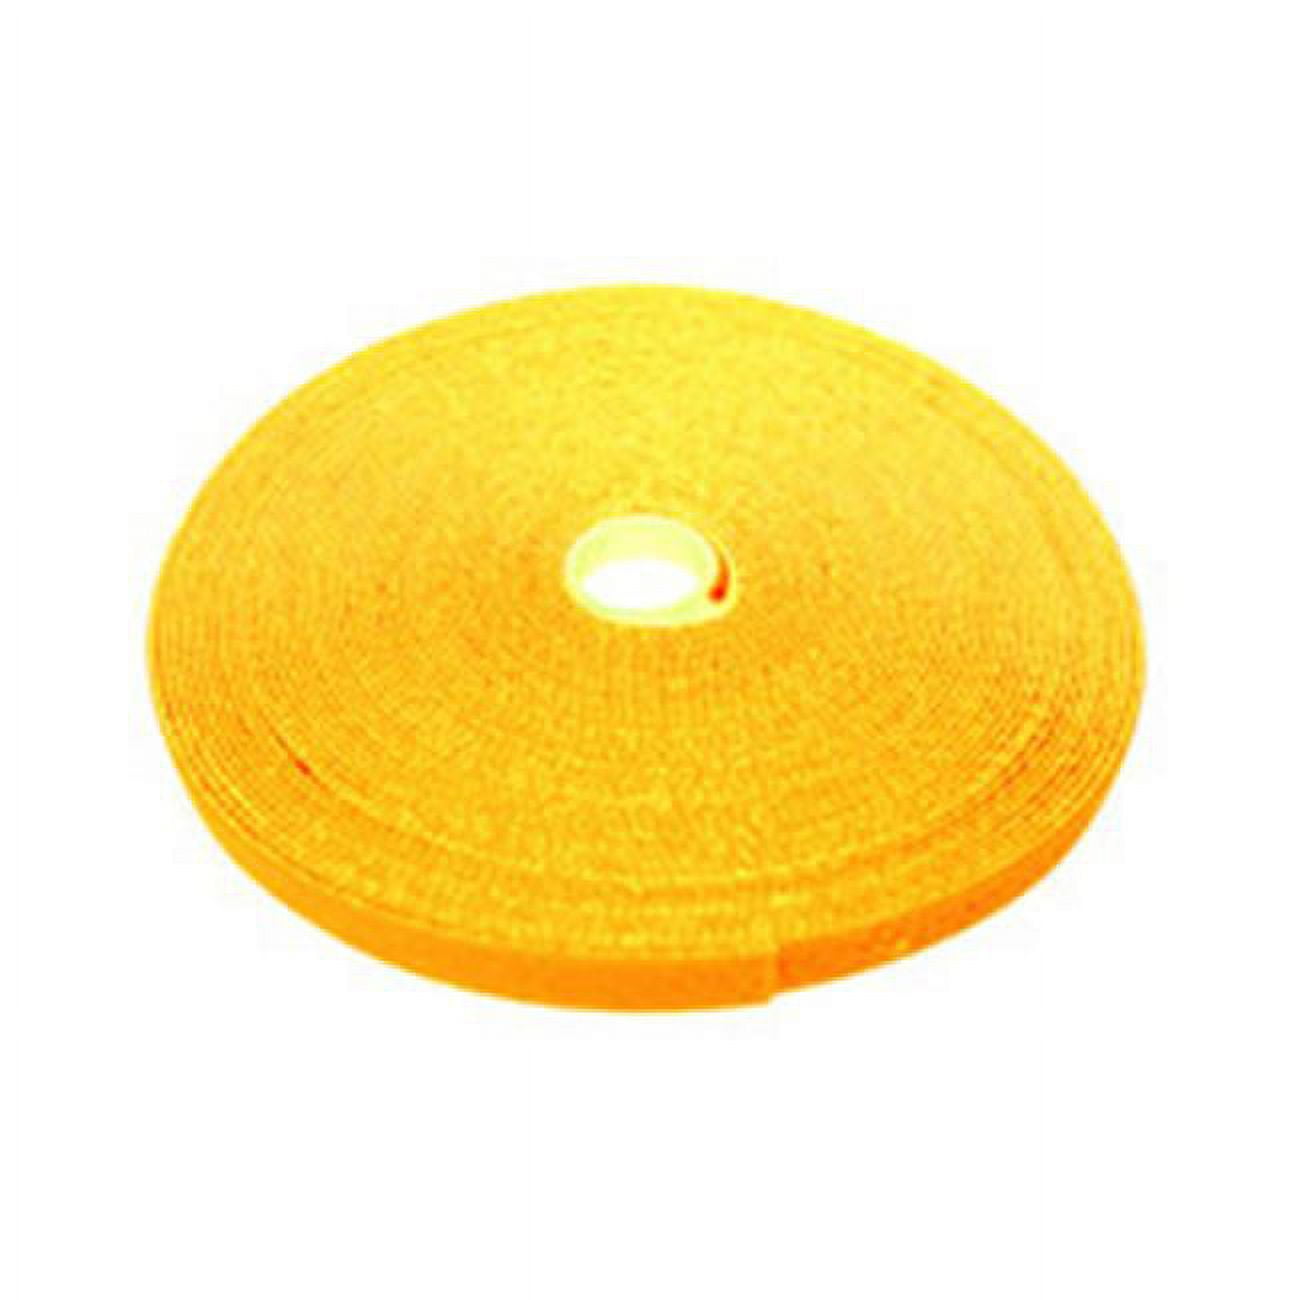 Cablewholesale 30ct-08150 0.75 In. X 50 Ft. Roll Hook & Loop Tape - Yellow